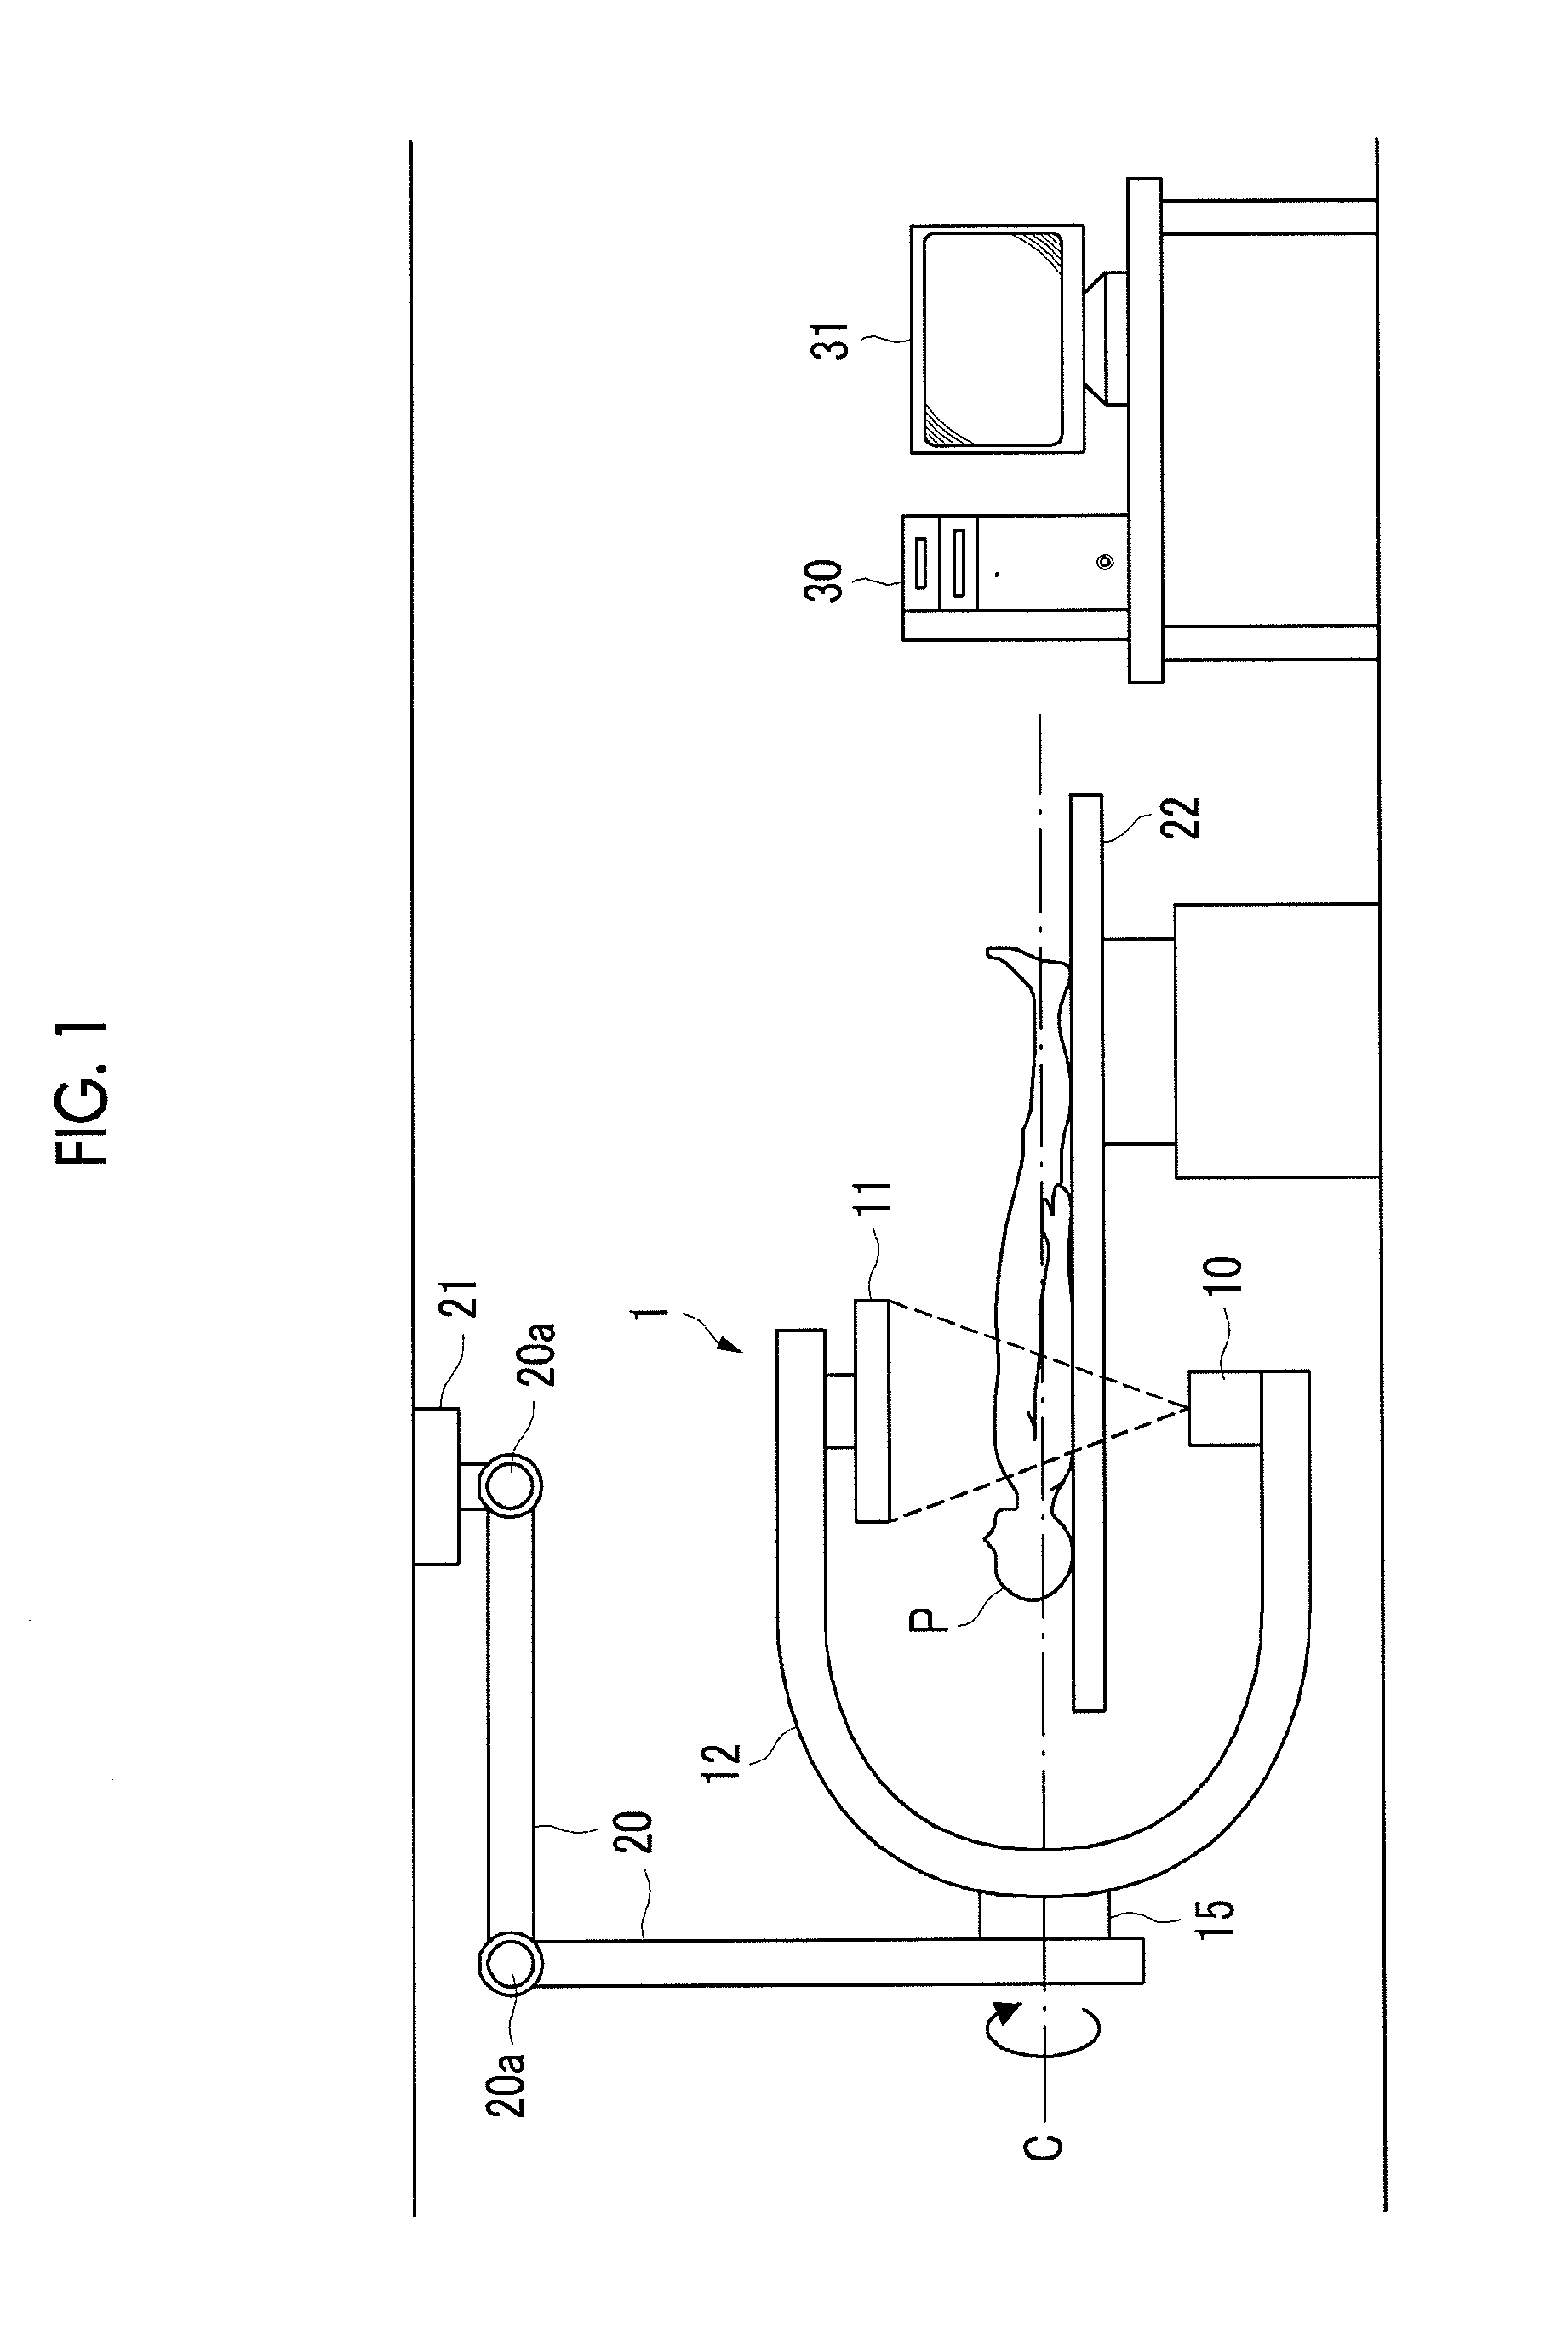 Stereoscopic image displaying method and device